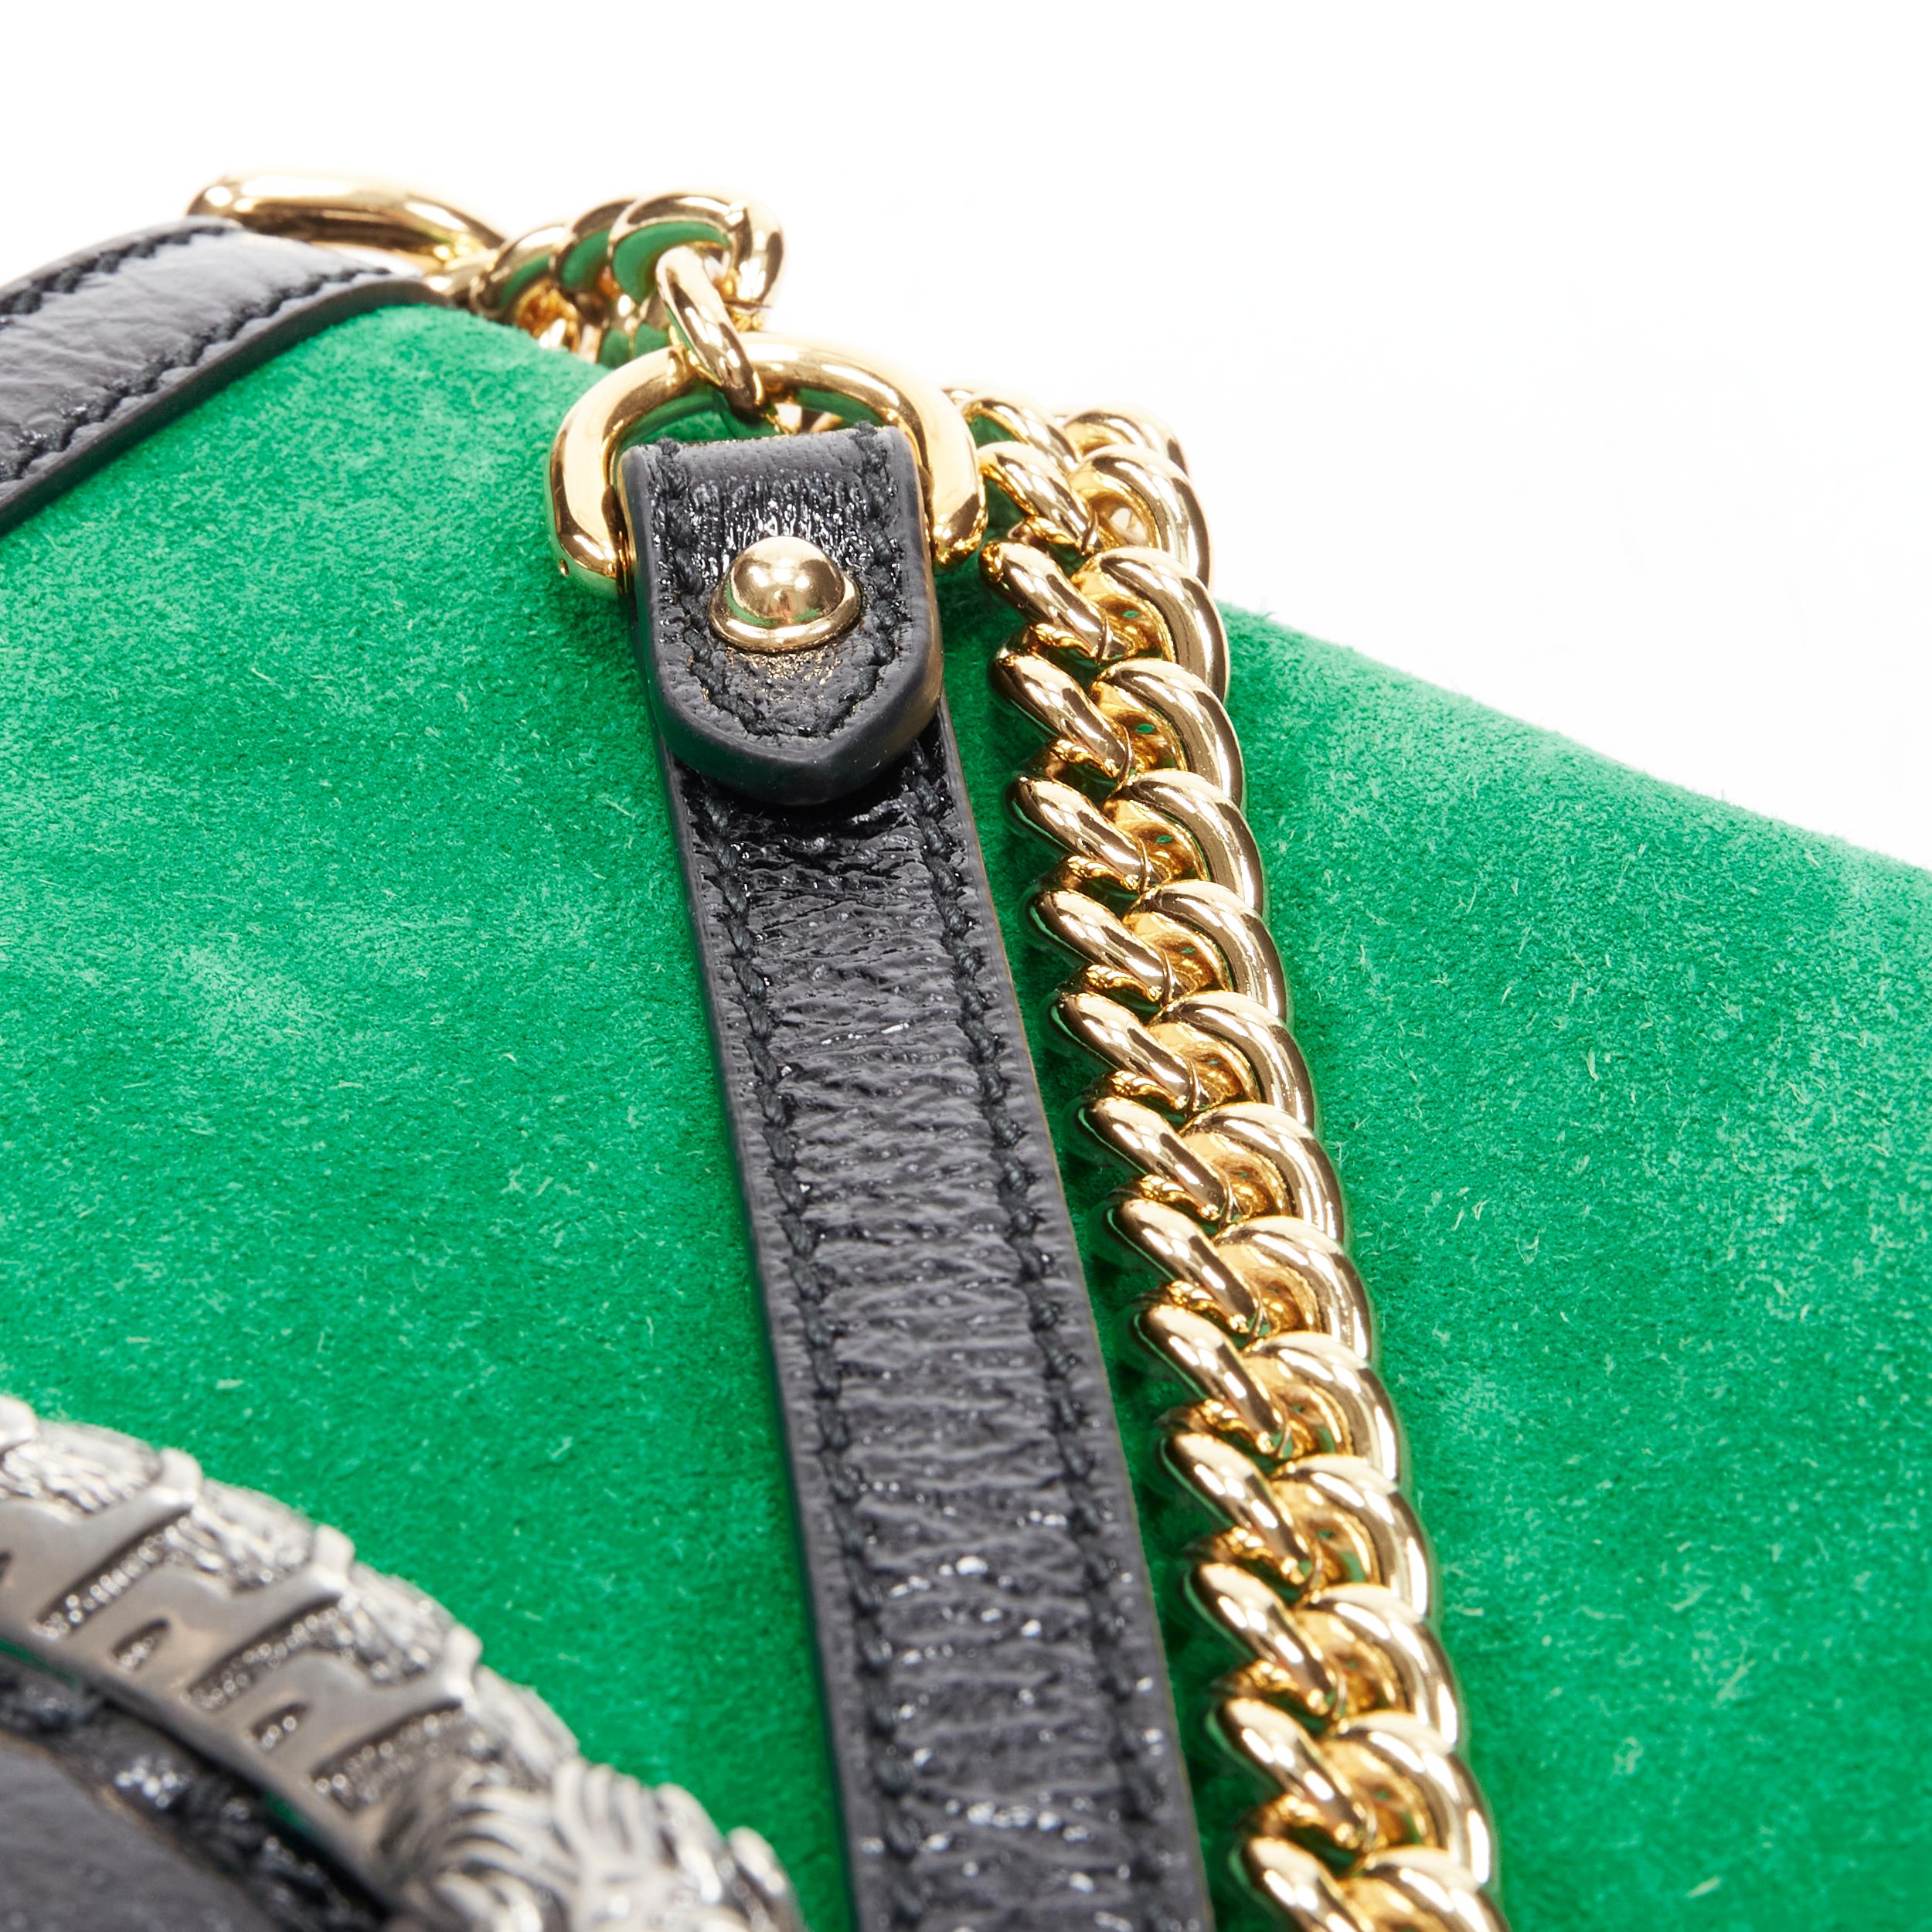 Women's GUCCI Dionysus Kelly green suede black patent trimmed crossbody bucket bag For Sale